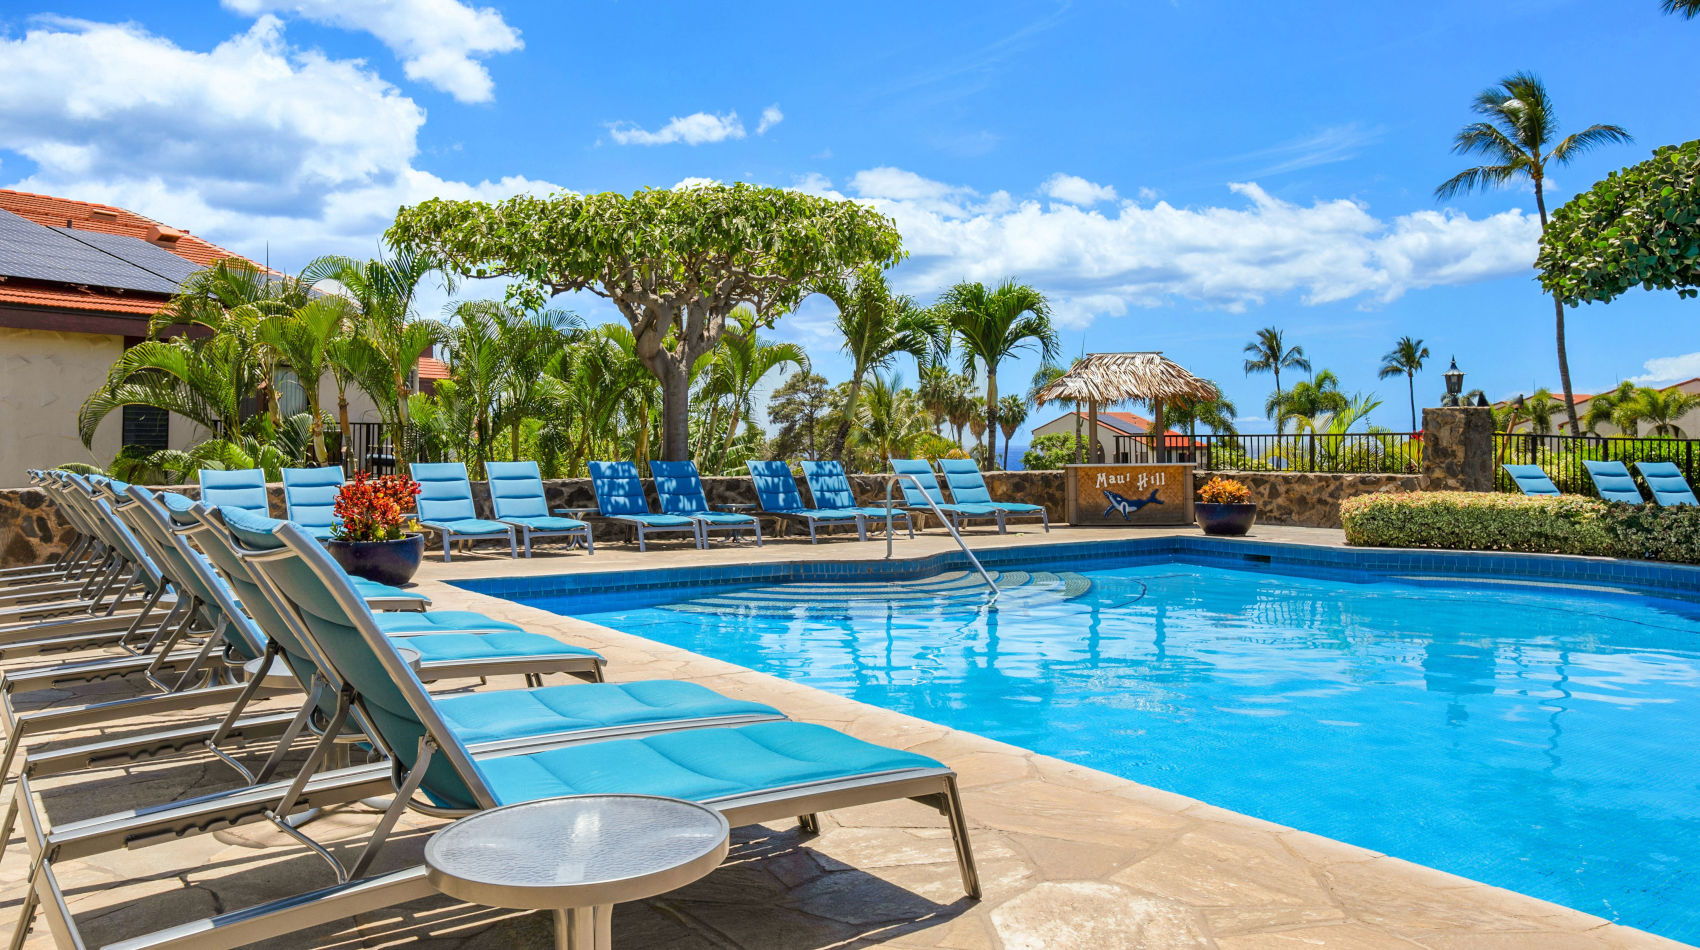 Pool at the Maui Hill with blue padded lounge chairs, landscaped with lush green palm trees and colorful bushes and accommodation building units in the background